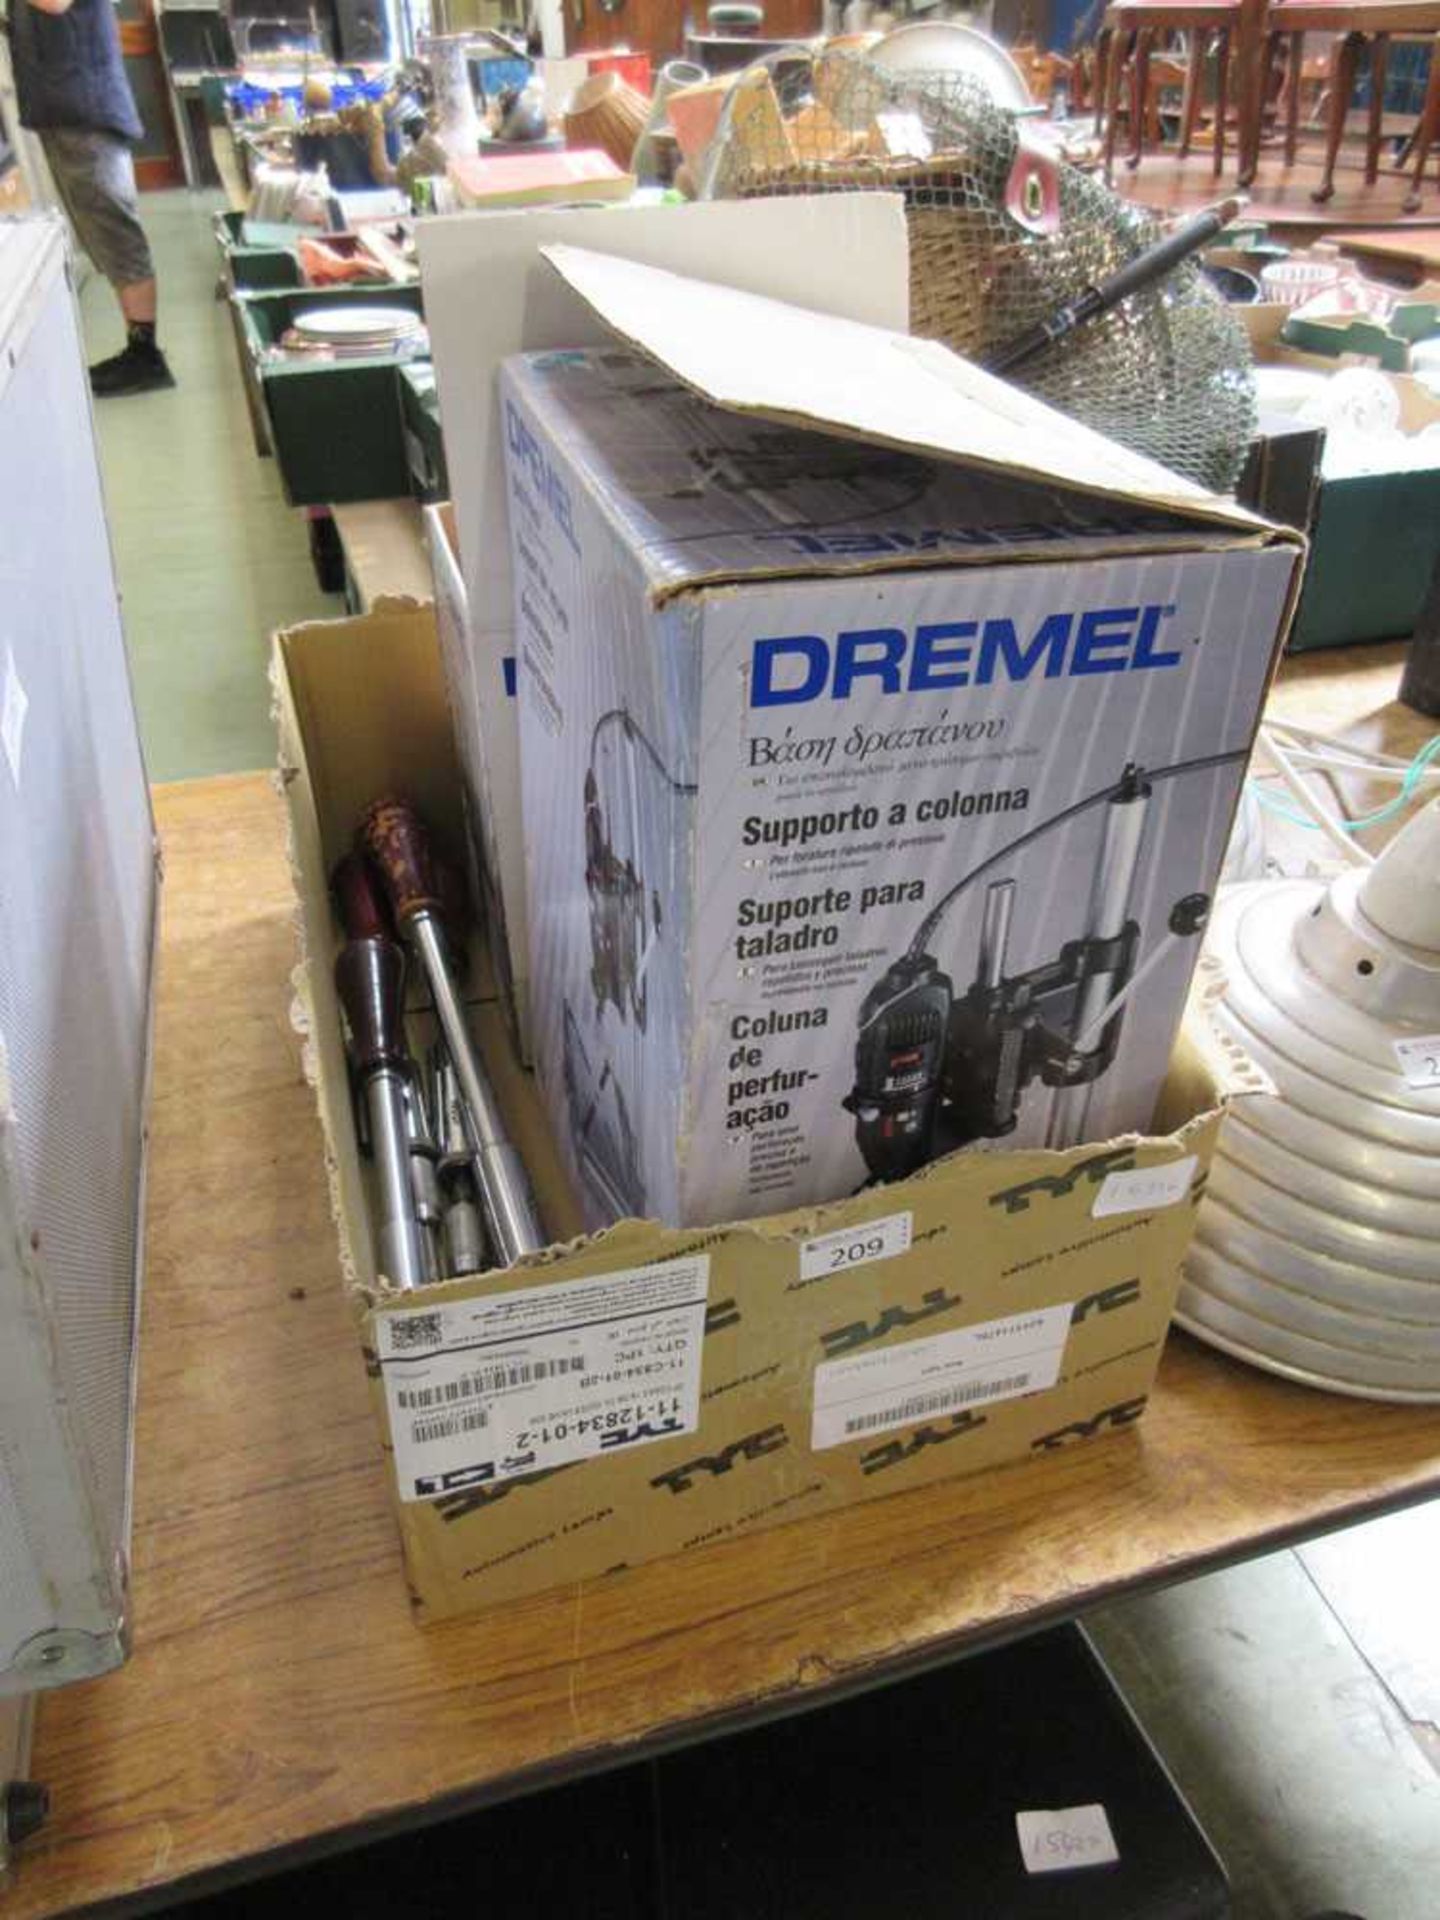 A boxed Dremel multitool on stand along with other hand tools